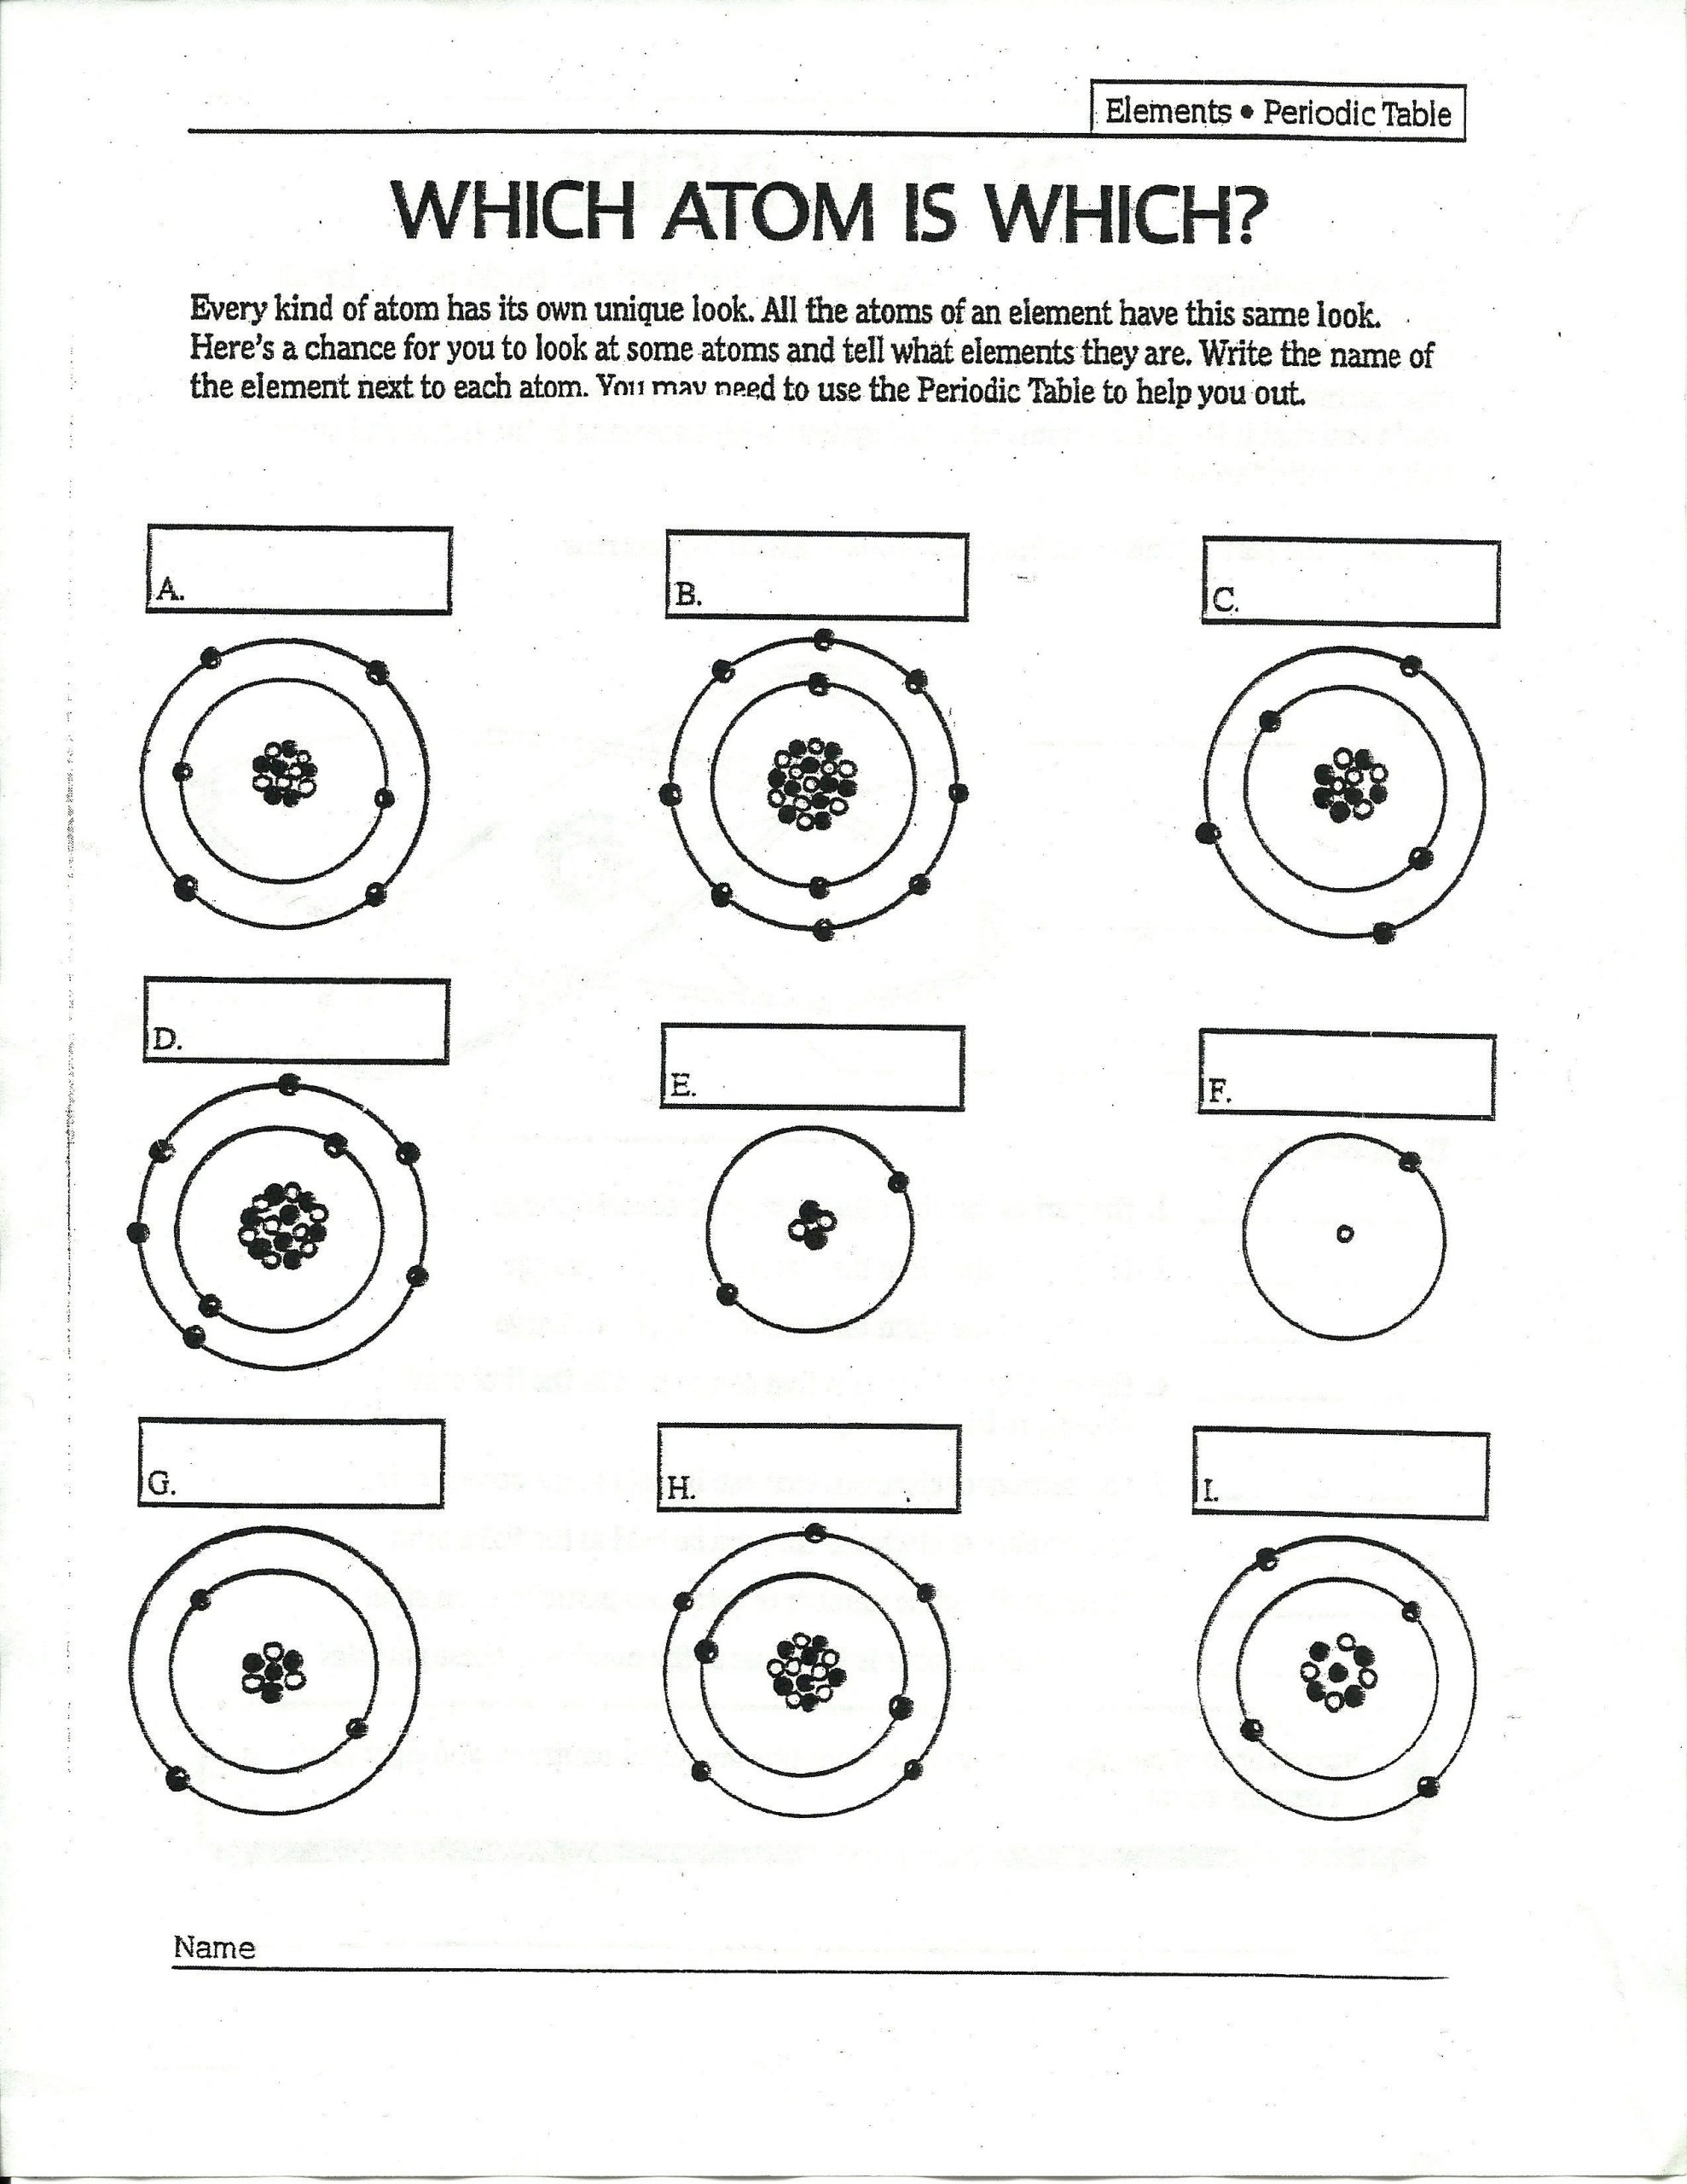 Atomic theory Worksheet Answers Answers to Drawing atoms Worksheet Answers to Drawing